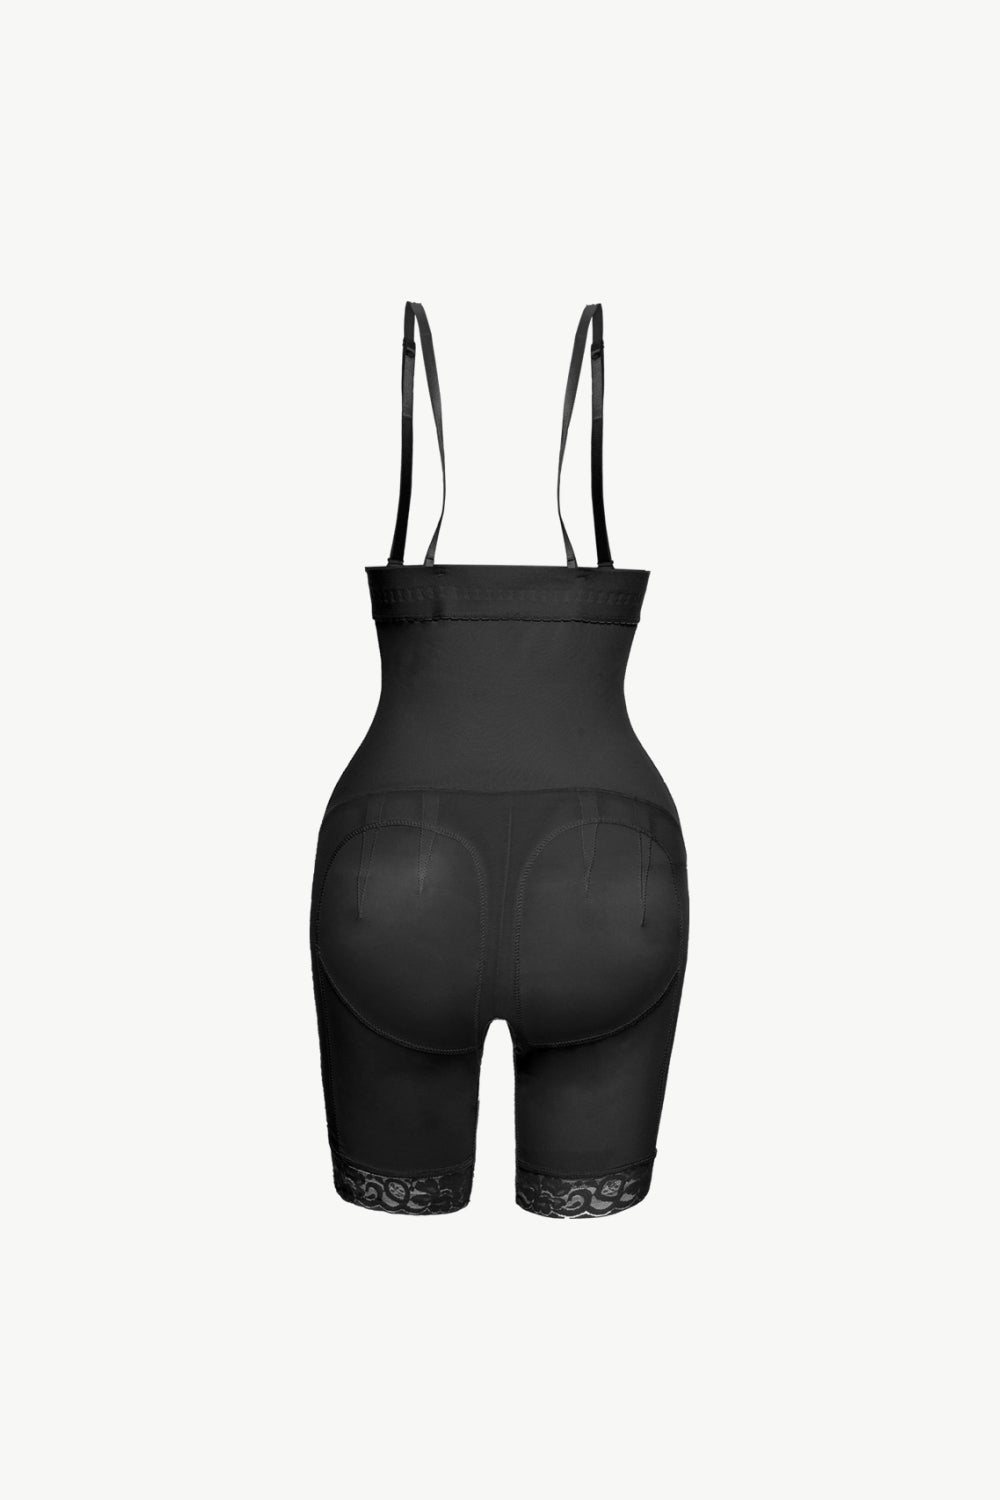 Full Size Hook-and-Eye Lace Trim Shaping Bodysuit ONLINE ONLY - Beauty Junkee Collection